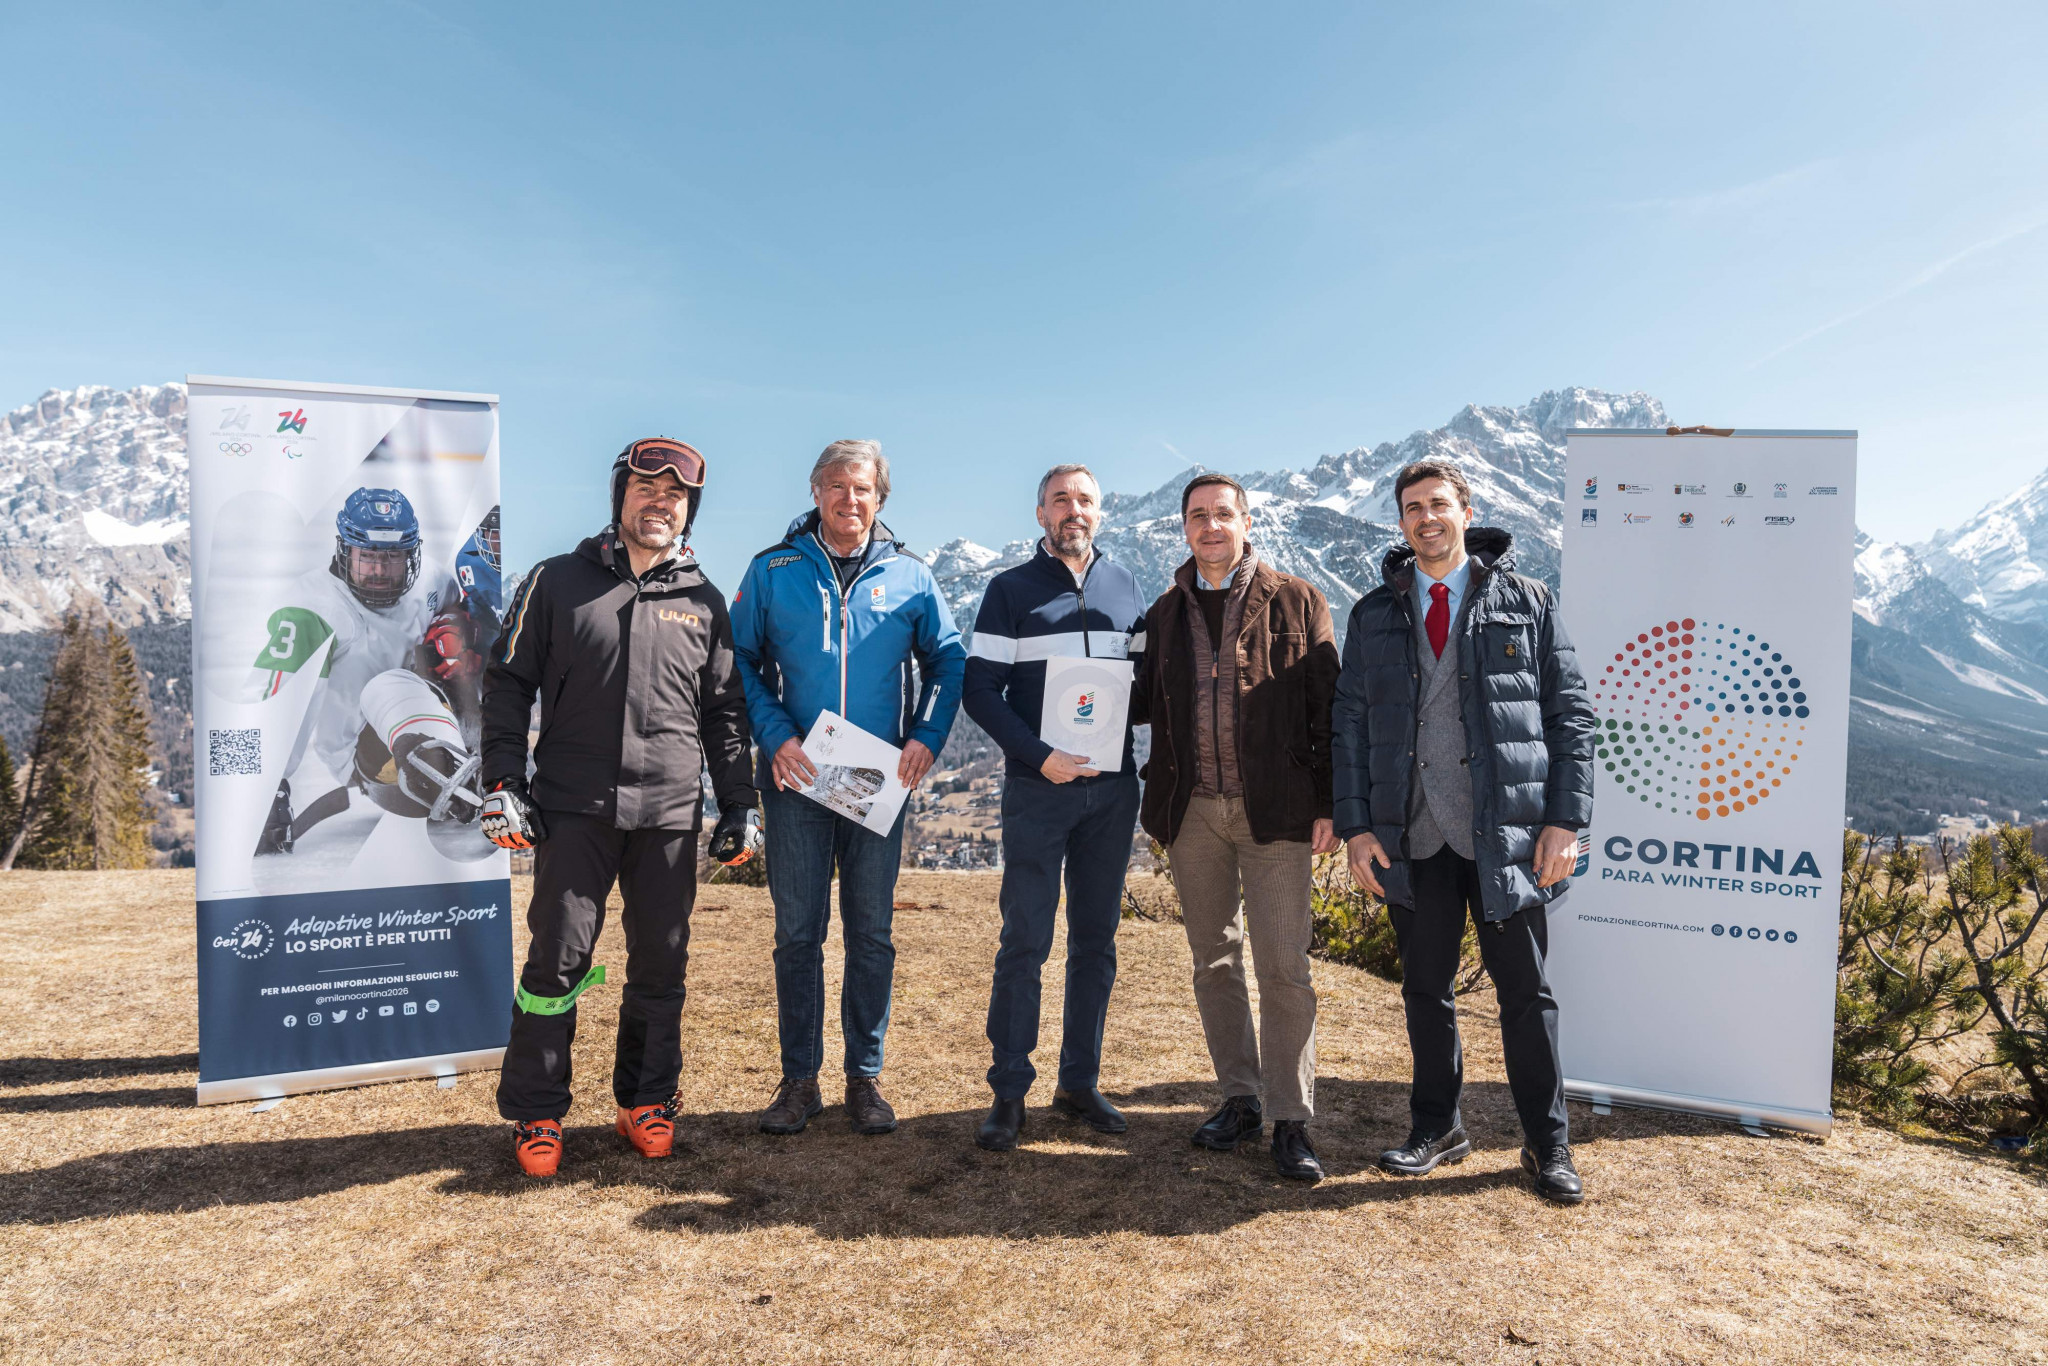 The Cortina Foundation is set to assist with preparations for Milan Cortina 2026 in Cortina d'Ampezzo, Belluno and Veneto ©Milan Cortina 2026